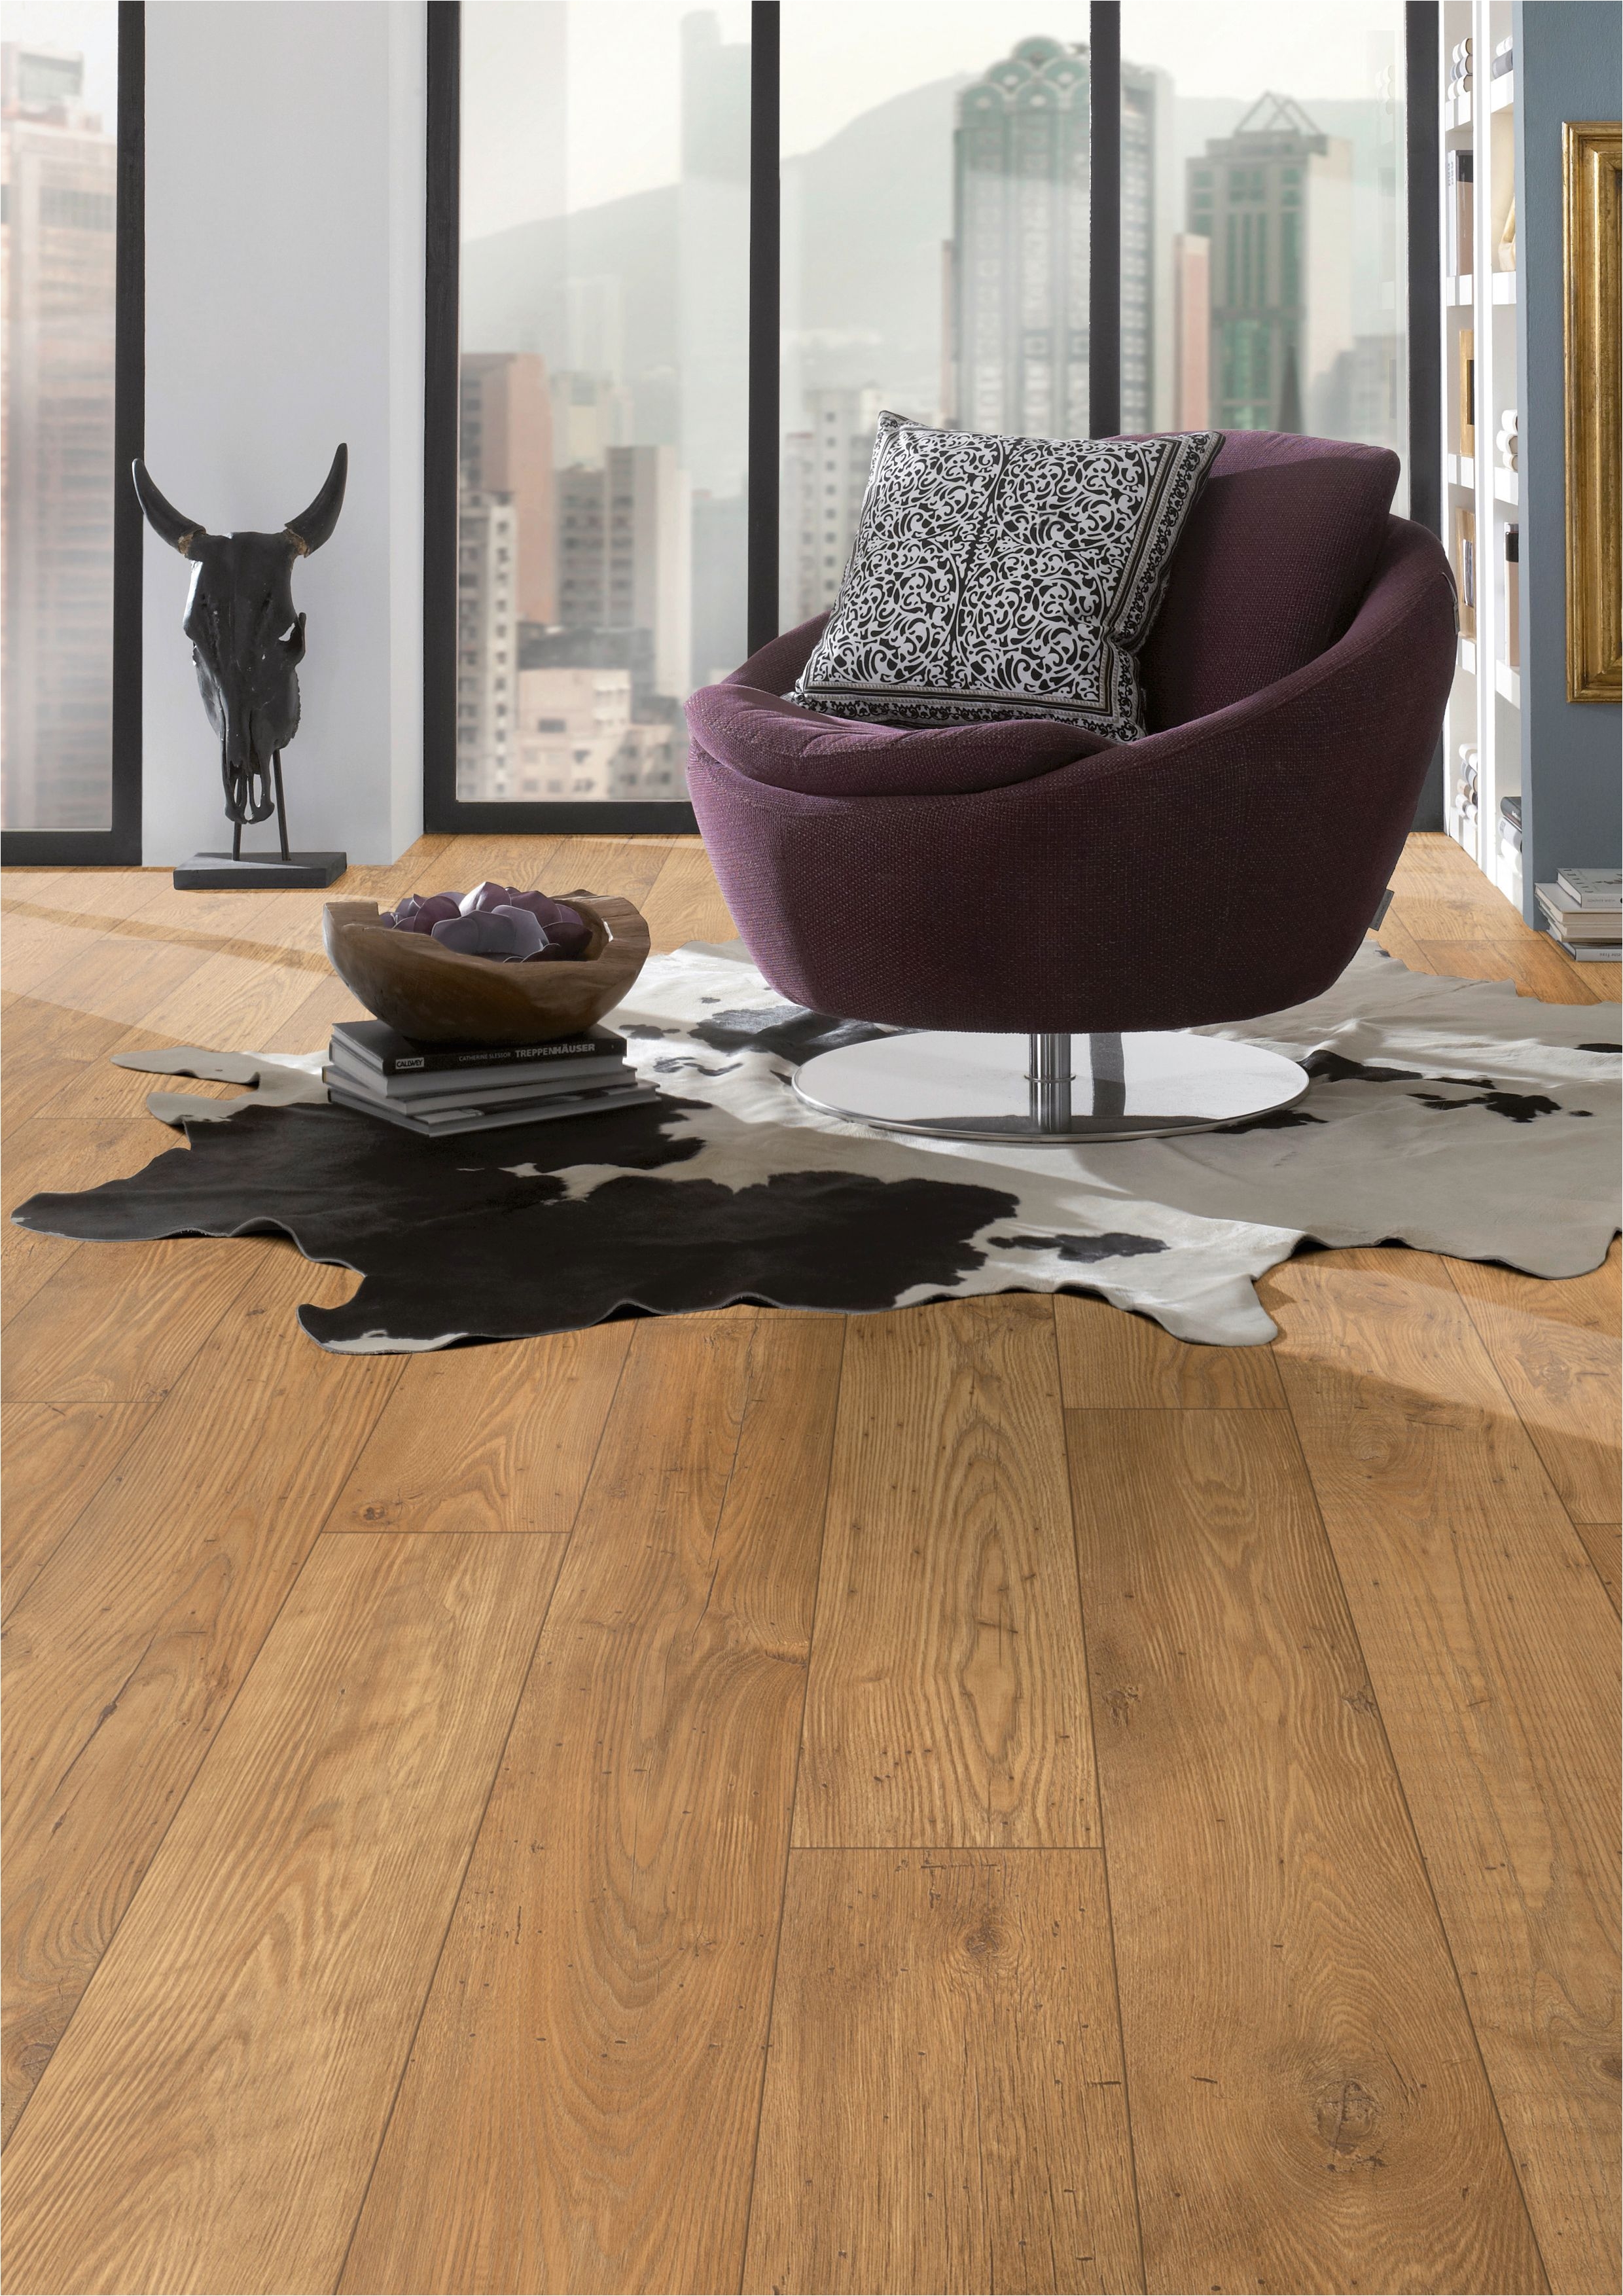 nobile chestnut effect authentic embossed finish laminate flooring 1 73 ma pack departments diy at